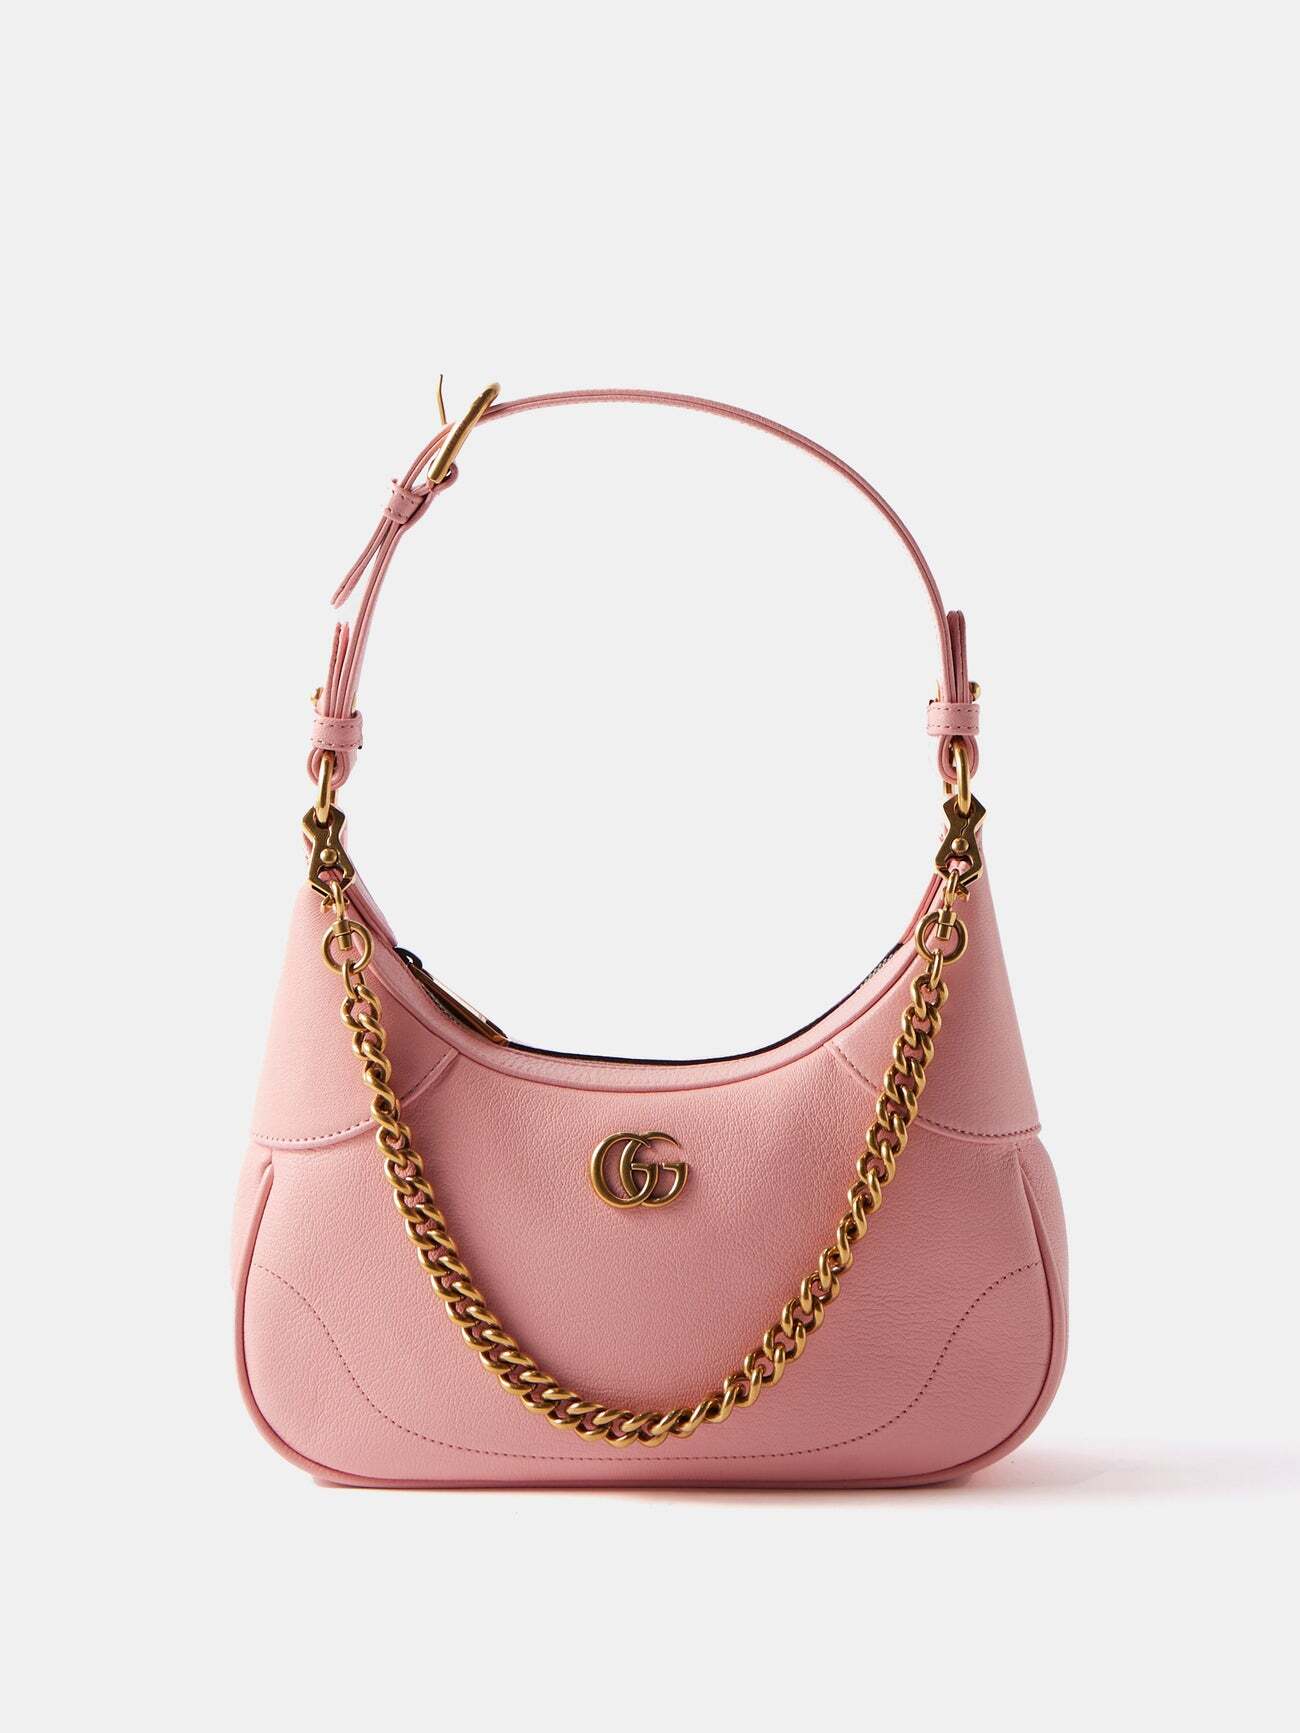 Gucci - Aphrodite Small Leather Shoulder Bag - Womens - Light Pink